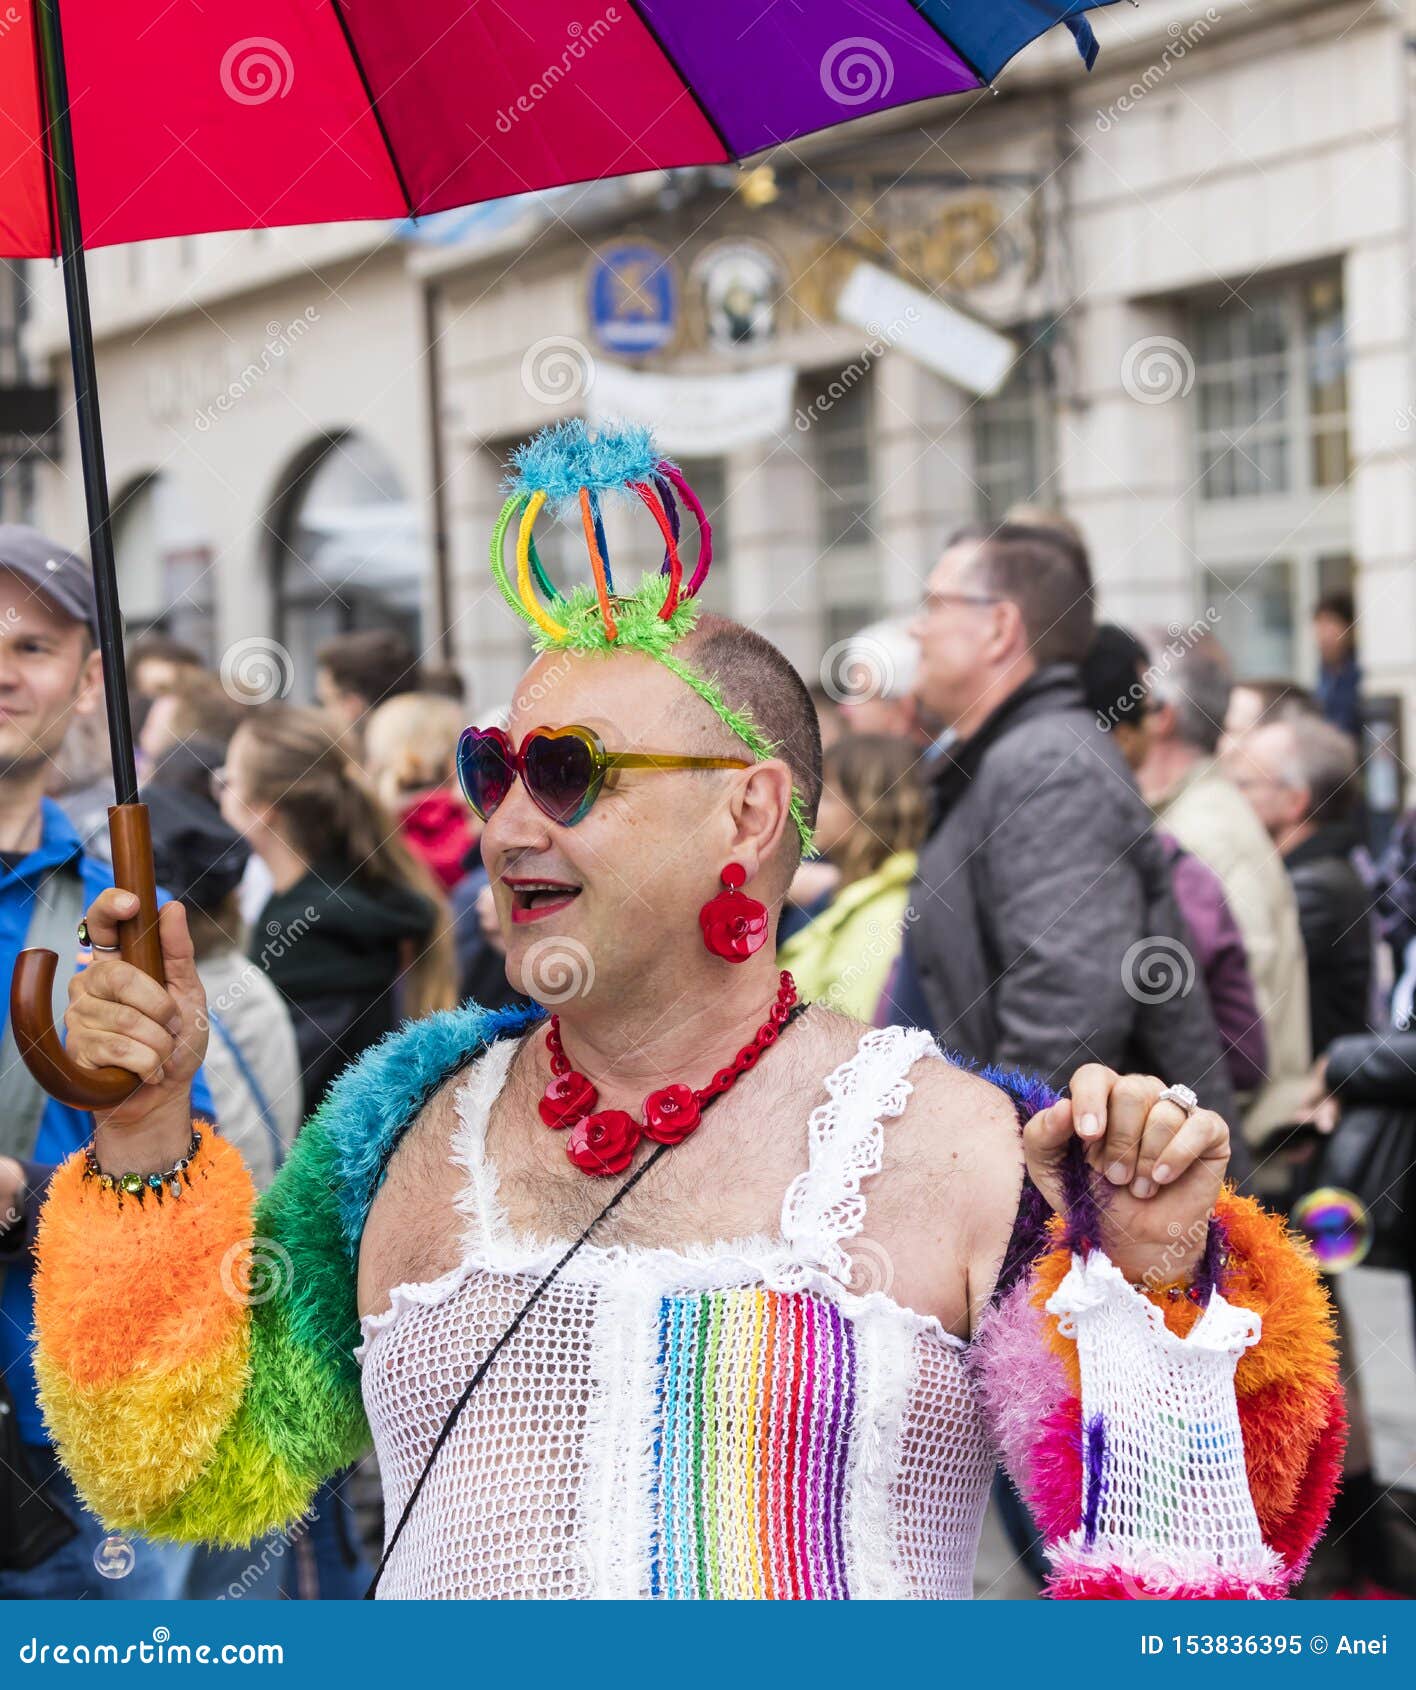 Seaport Not fashionable Executable 2019: a Gay Man in an Exquisite Rainbow Costume Attending the Gay Pride  Parade Also Known As Christopher Street Day CSD,Munich Editorial Image -  Image of celebration, exquisite: 153836395